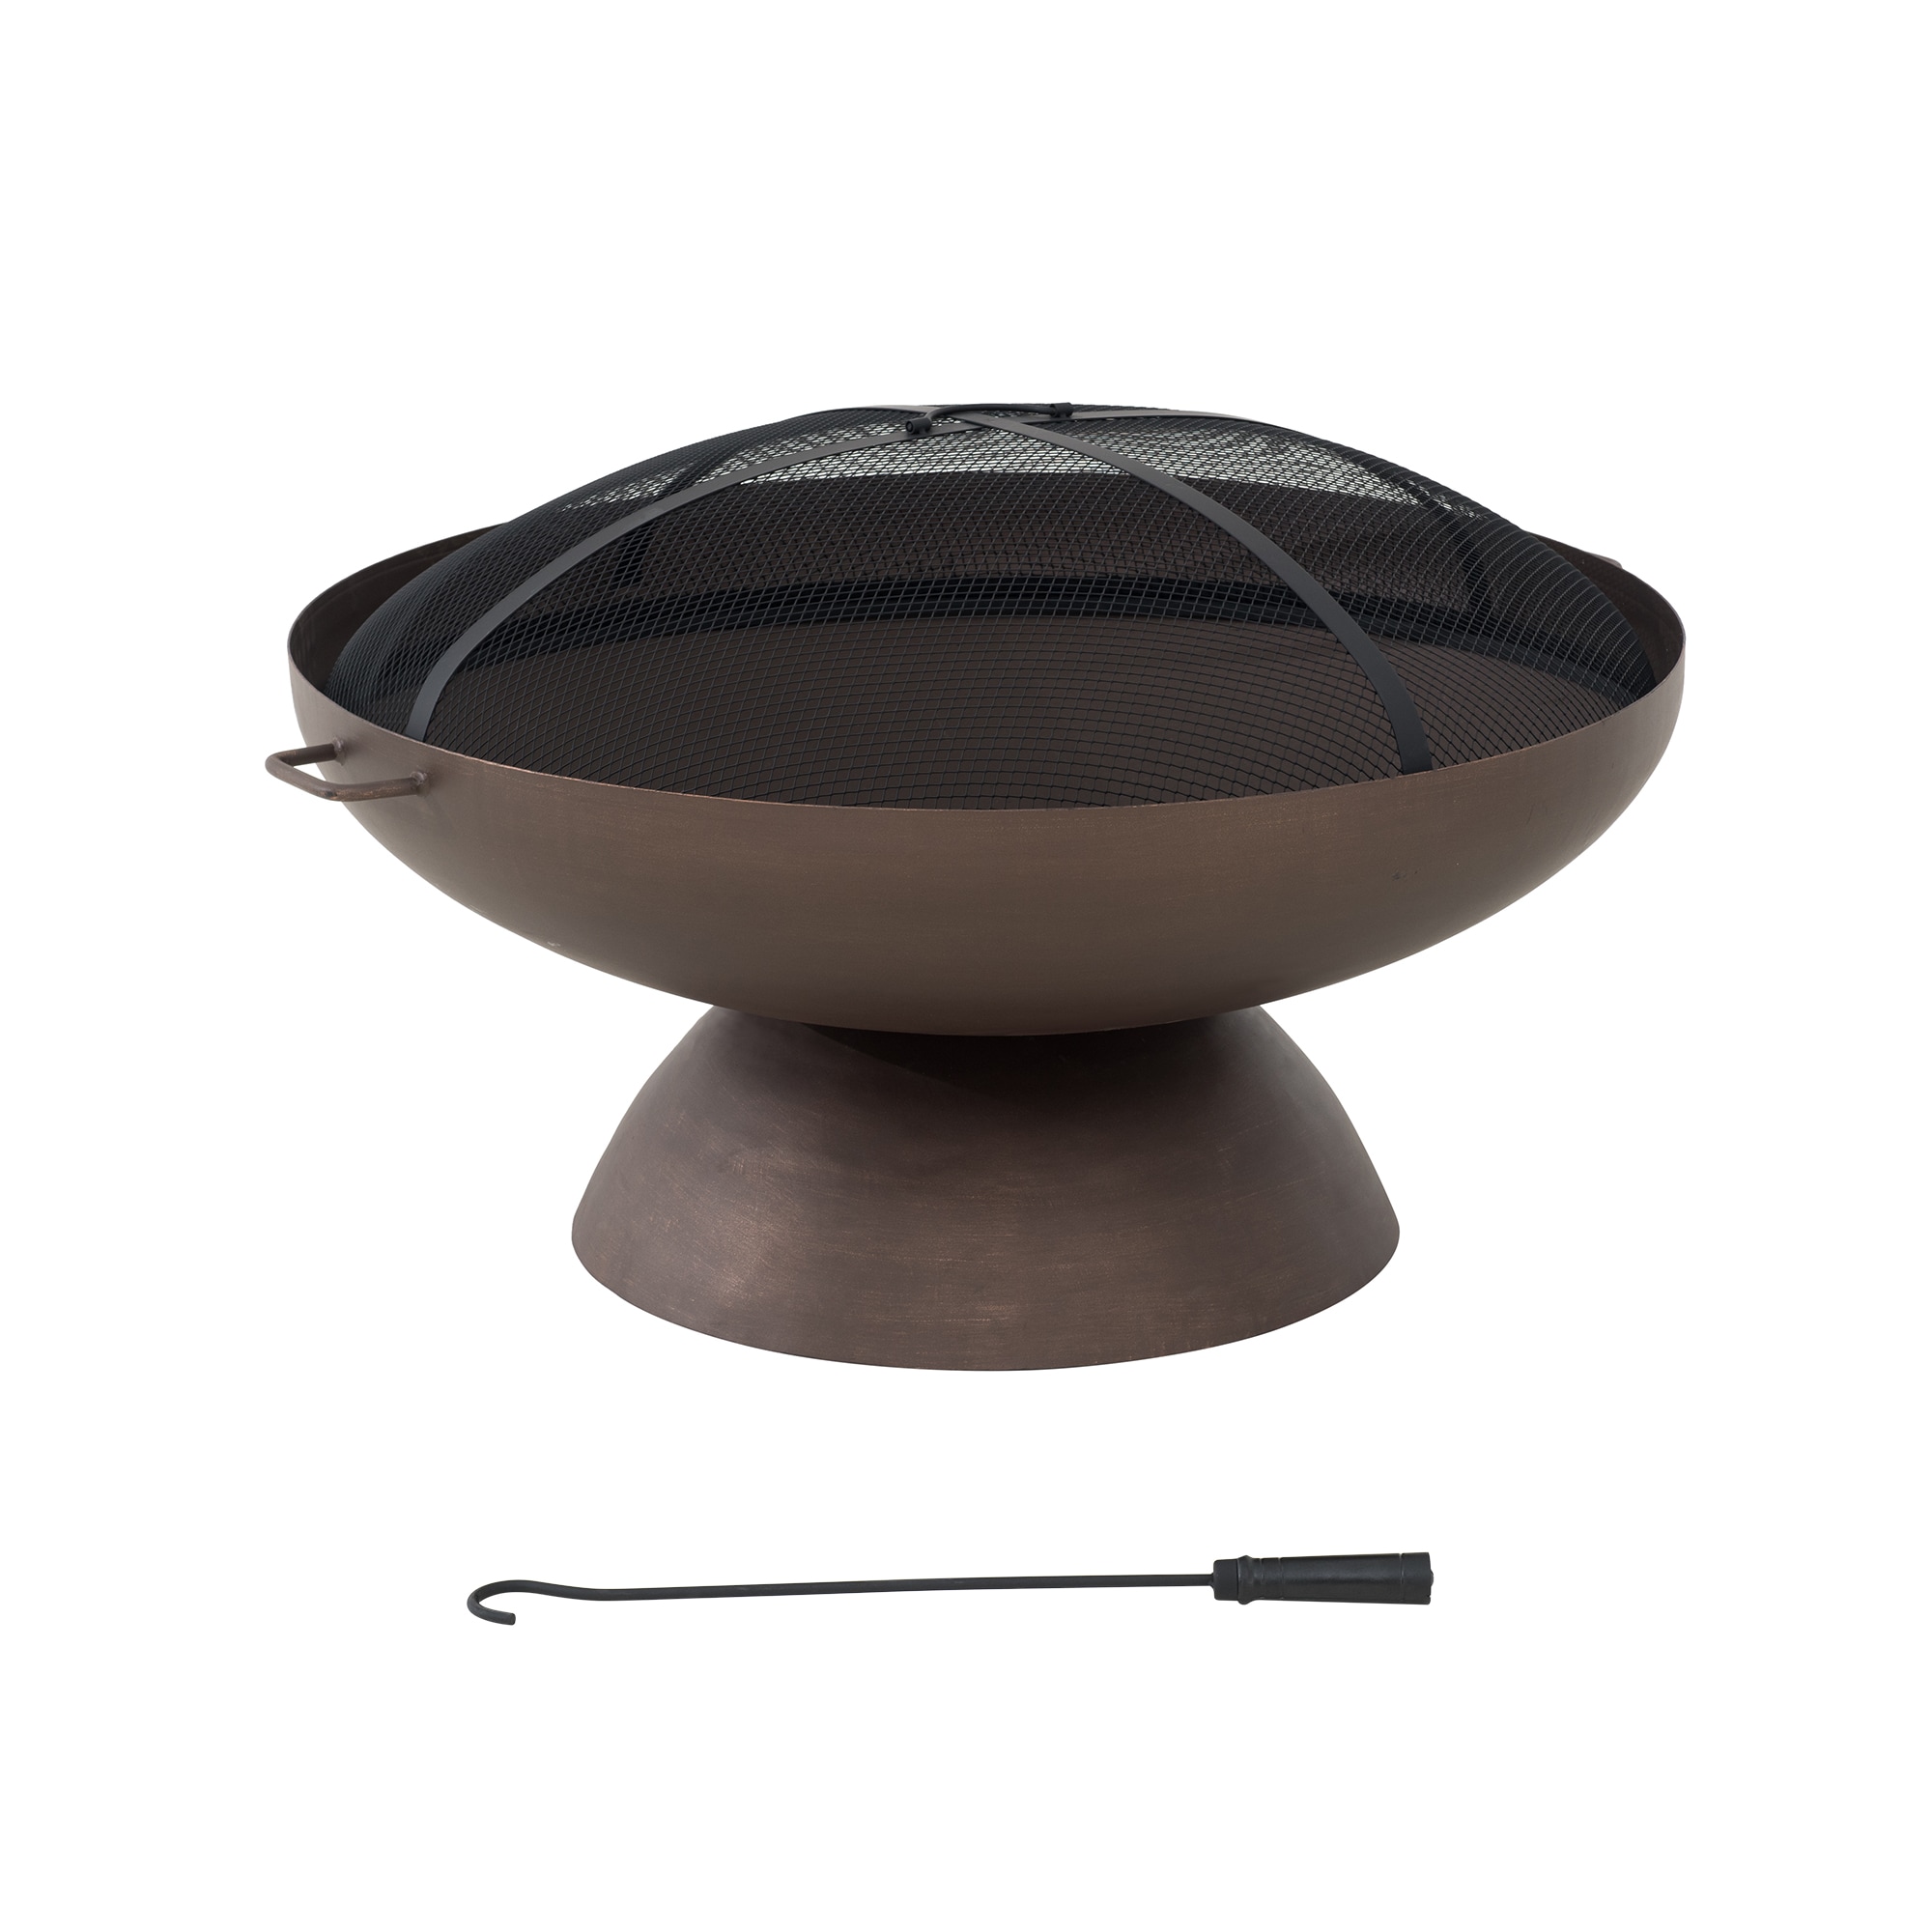 In Dennison Wood Burning Fire Pit, Fire Pit Bowl Insert Replacement